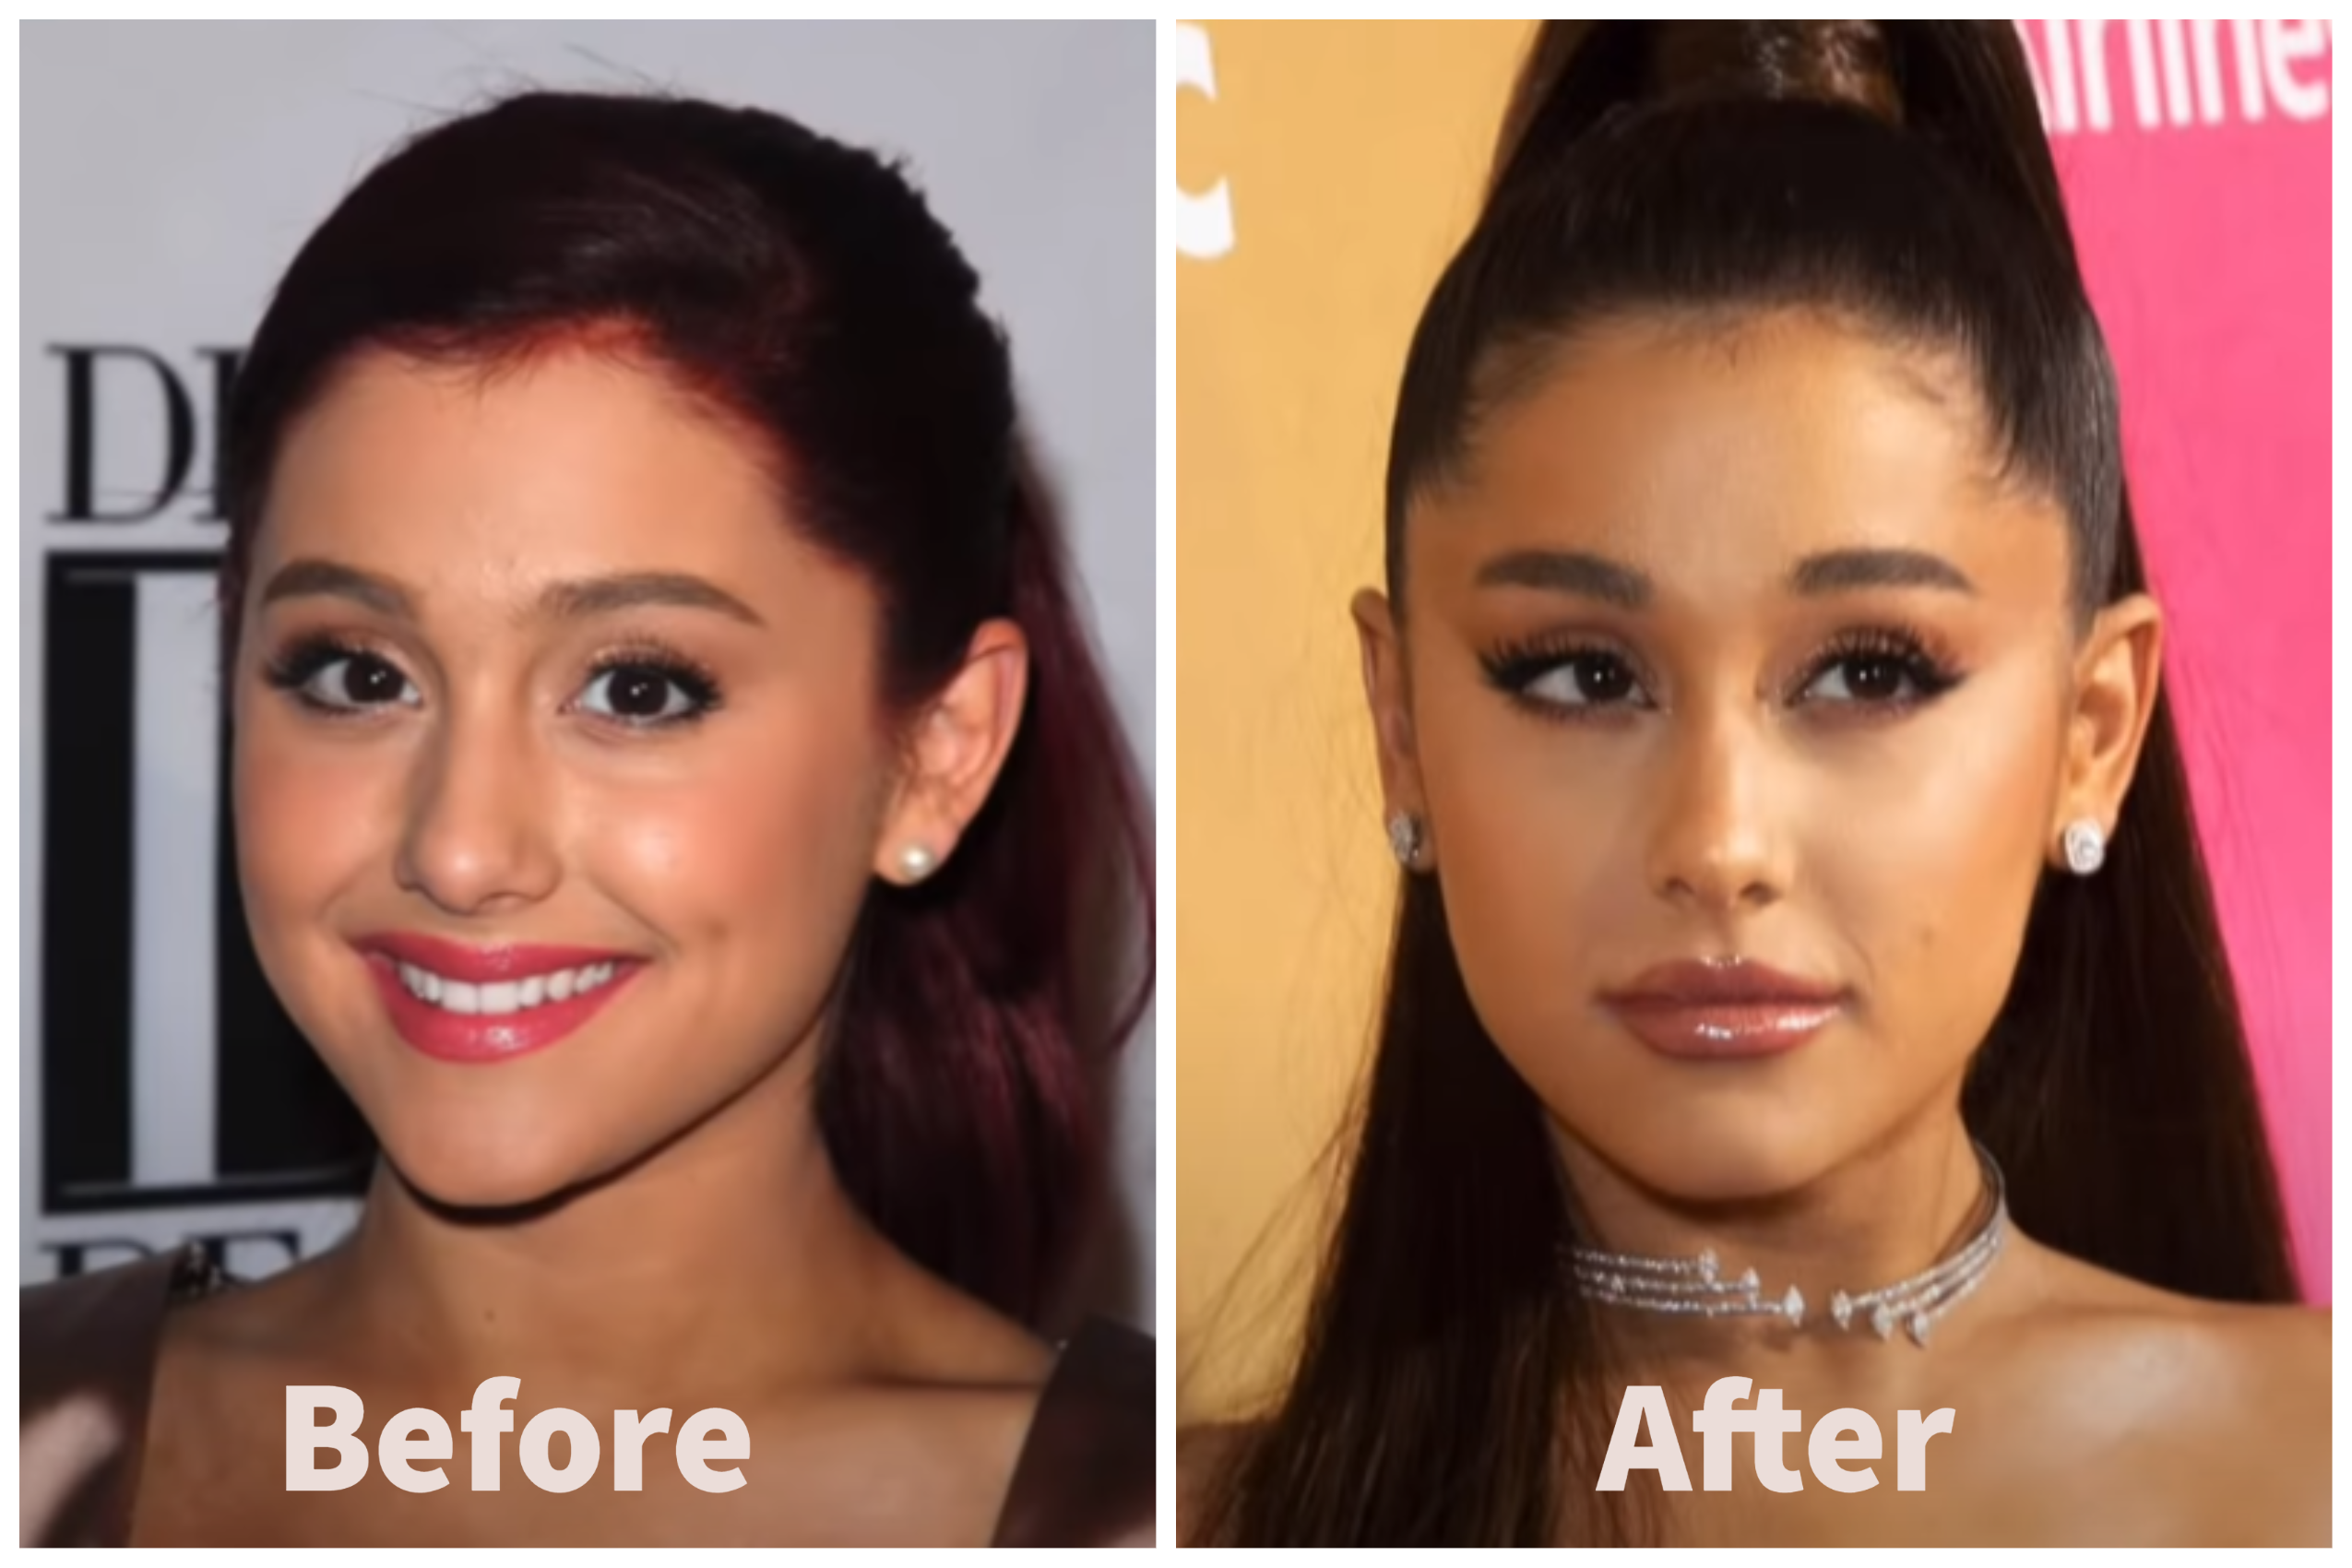 Ariana Grande Before and After Plastic Surgery